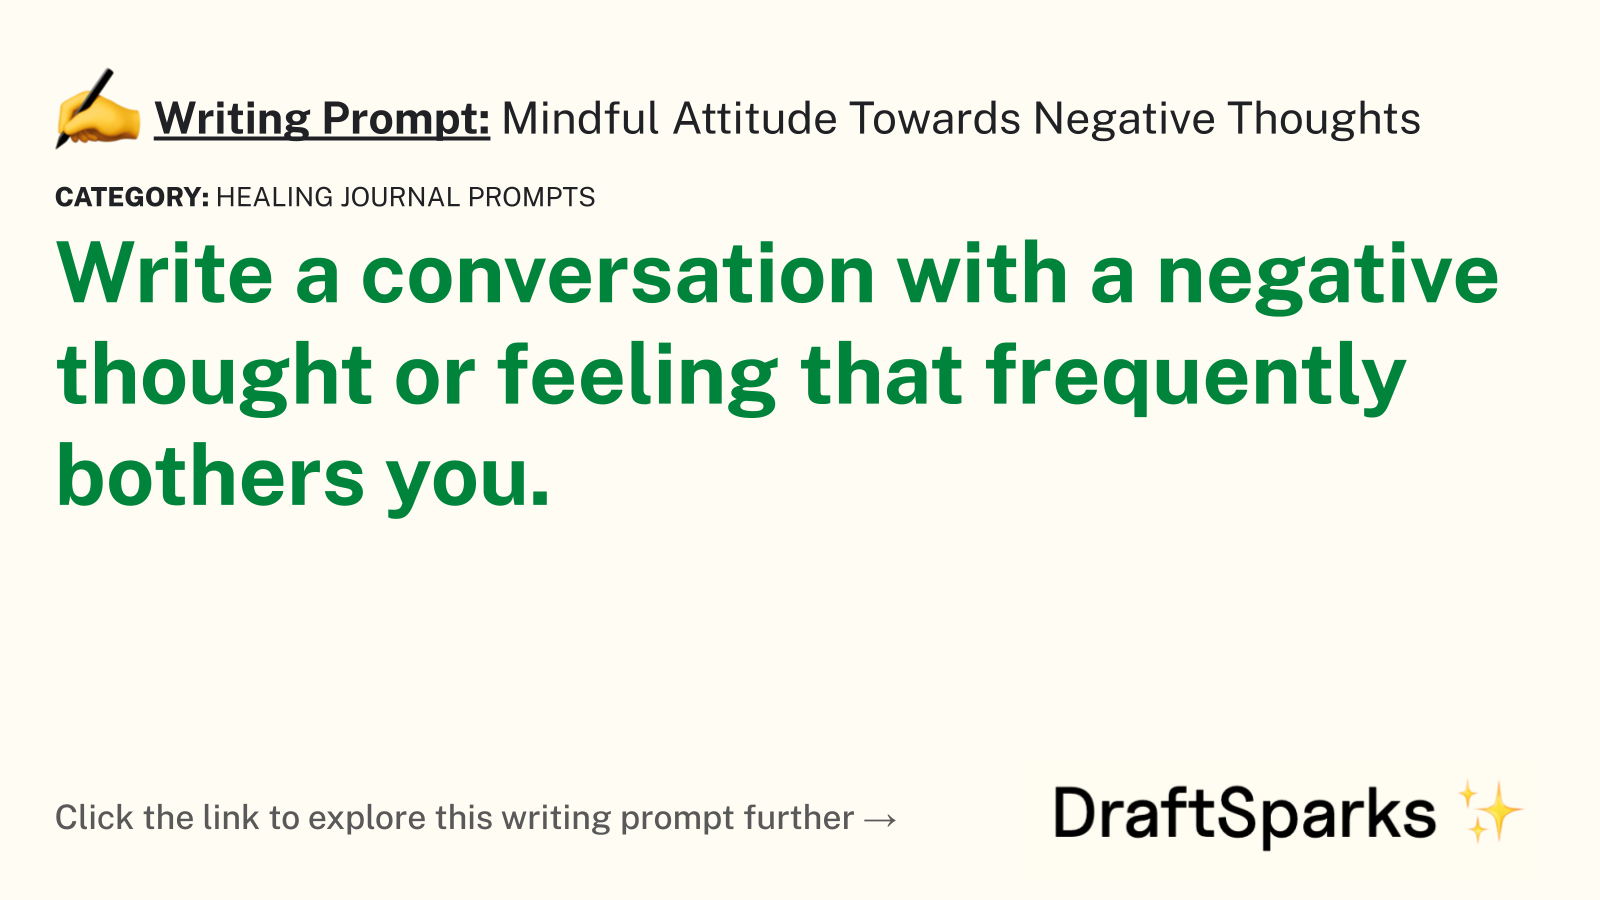 Mindful Attitude Towards Negative Thoughts